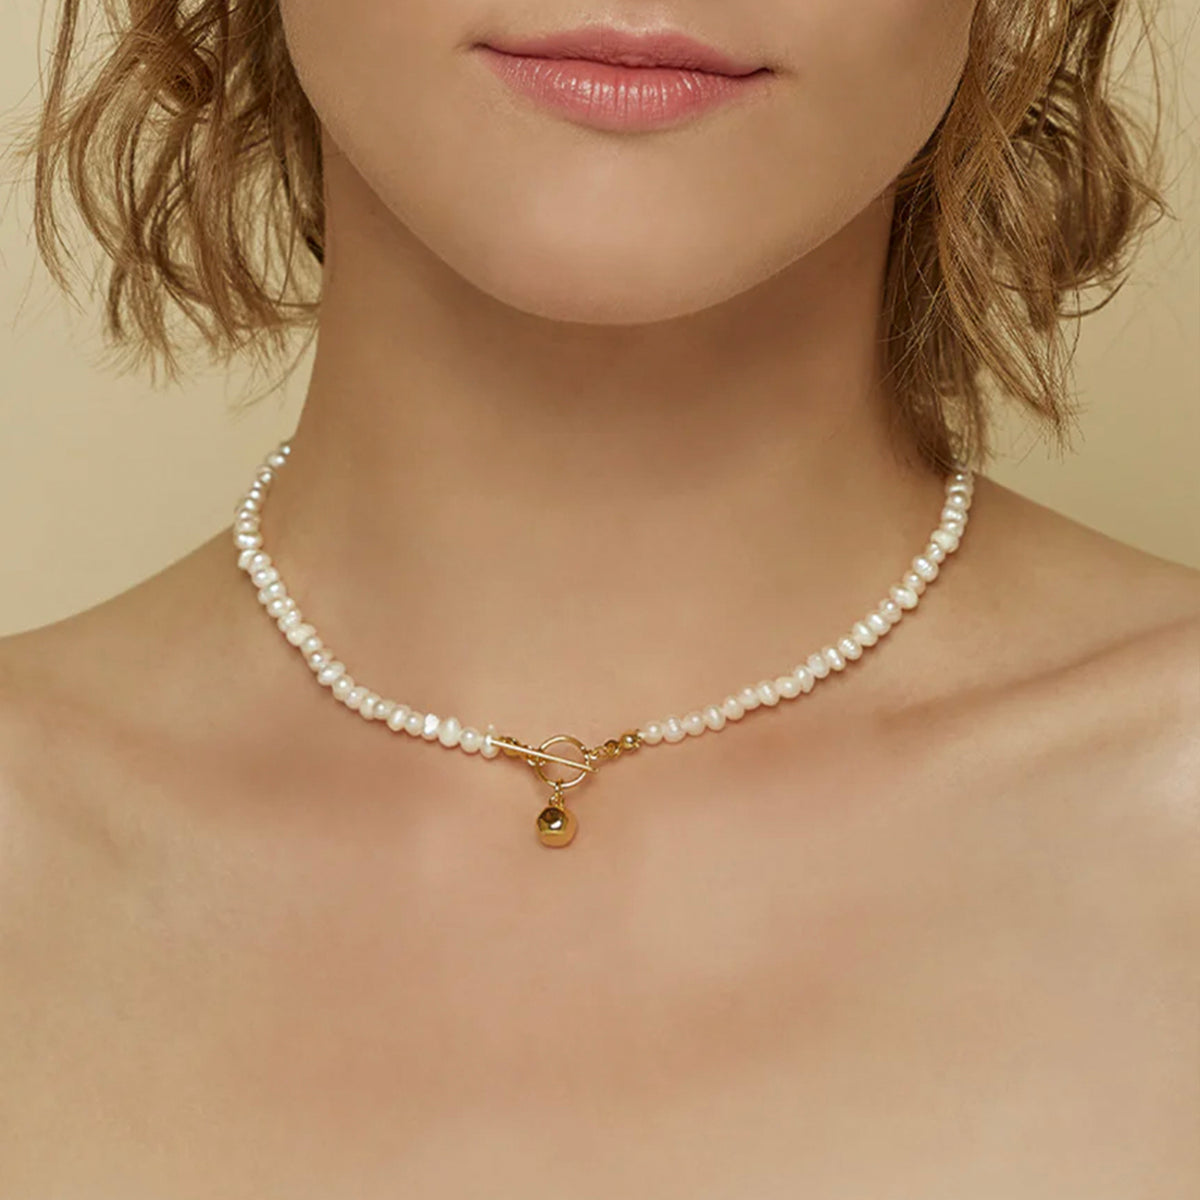 Elena Pearl Choker - Minimal Dainty Classic Golden Clasp Pearl Necklace